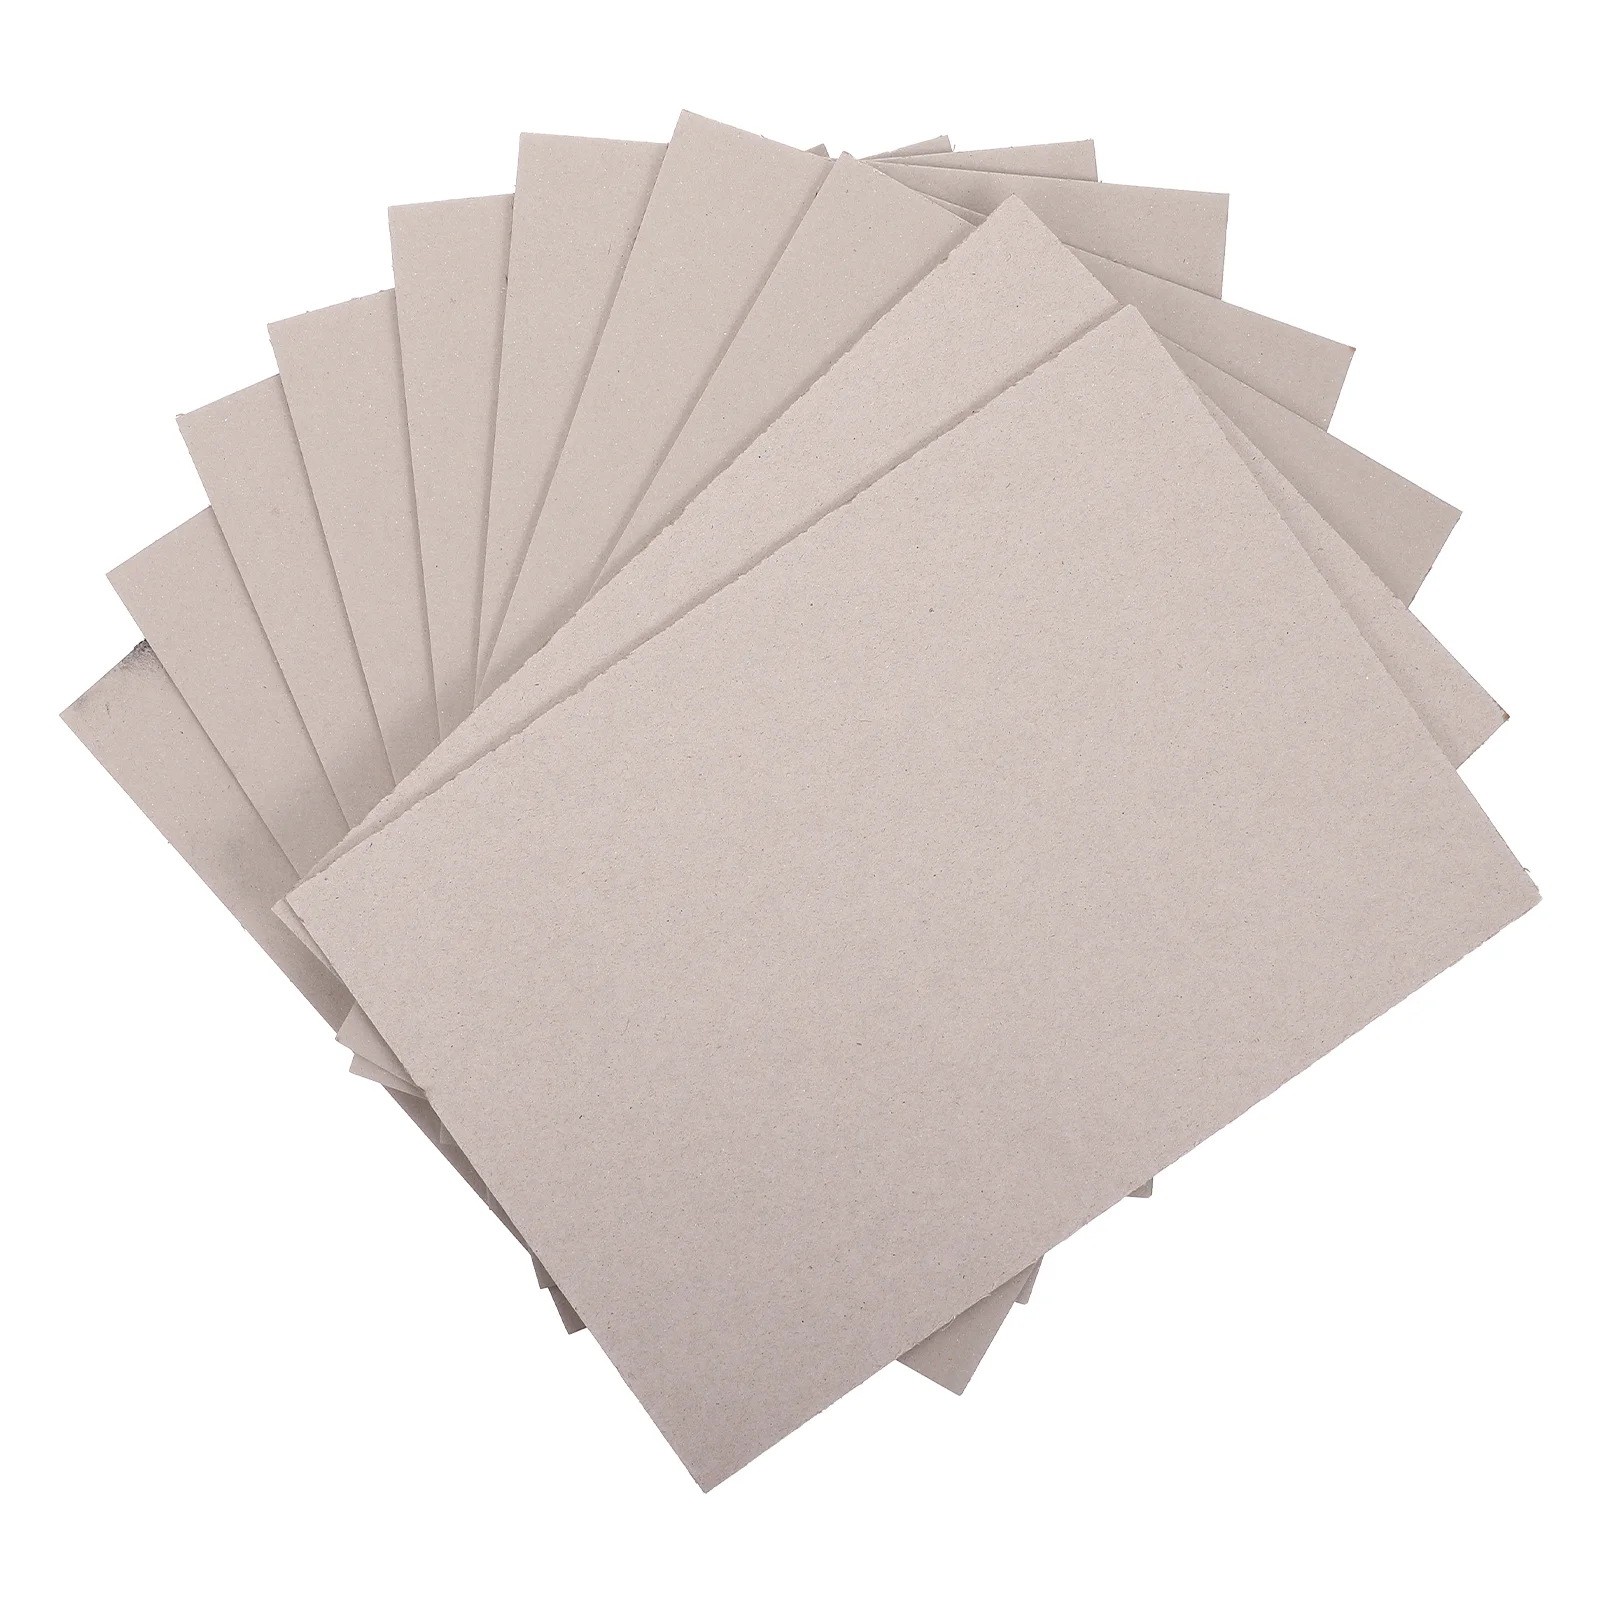 Cardboard Sheets Crafts Paper: Canvas Panel Alternative A4 10pcs 2. 5mm Thick Board DIY Painting Drawing Paperboard